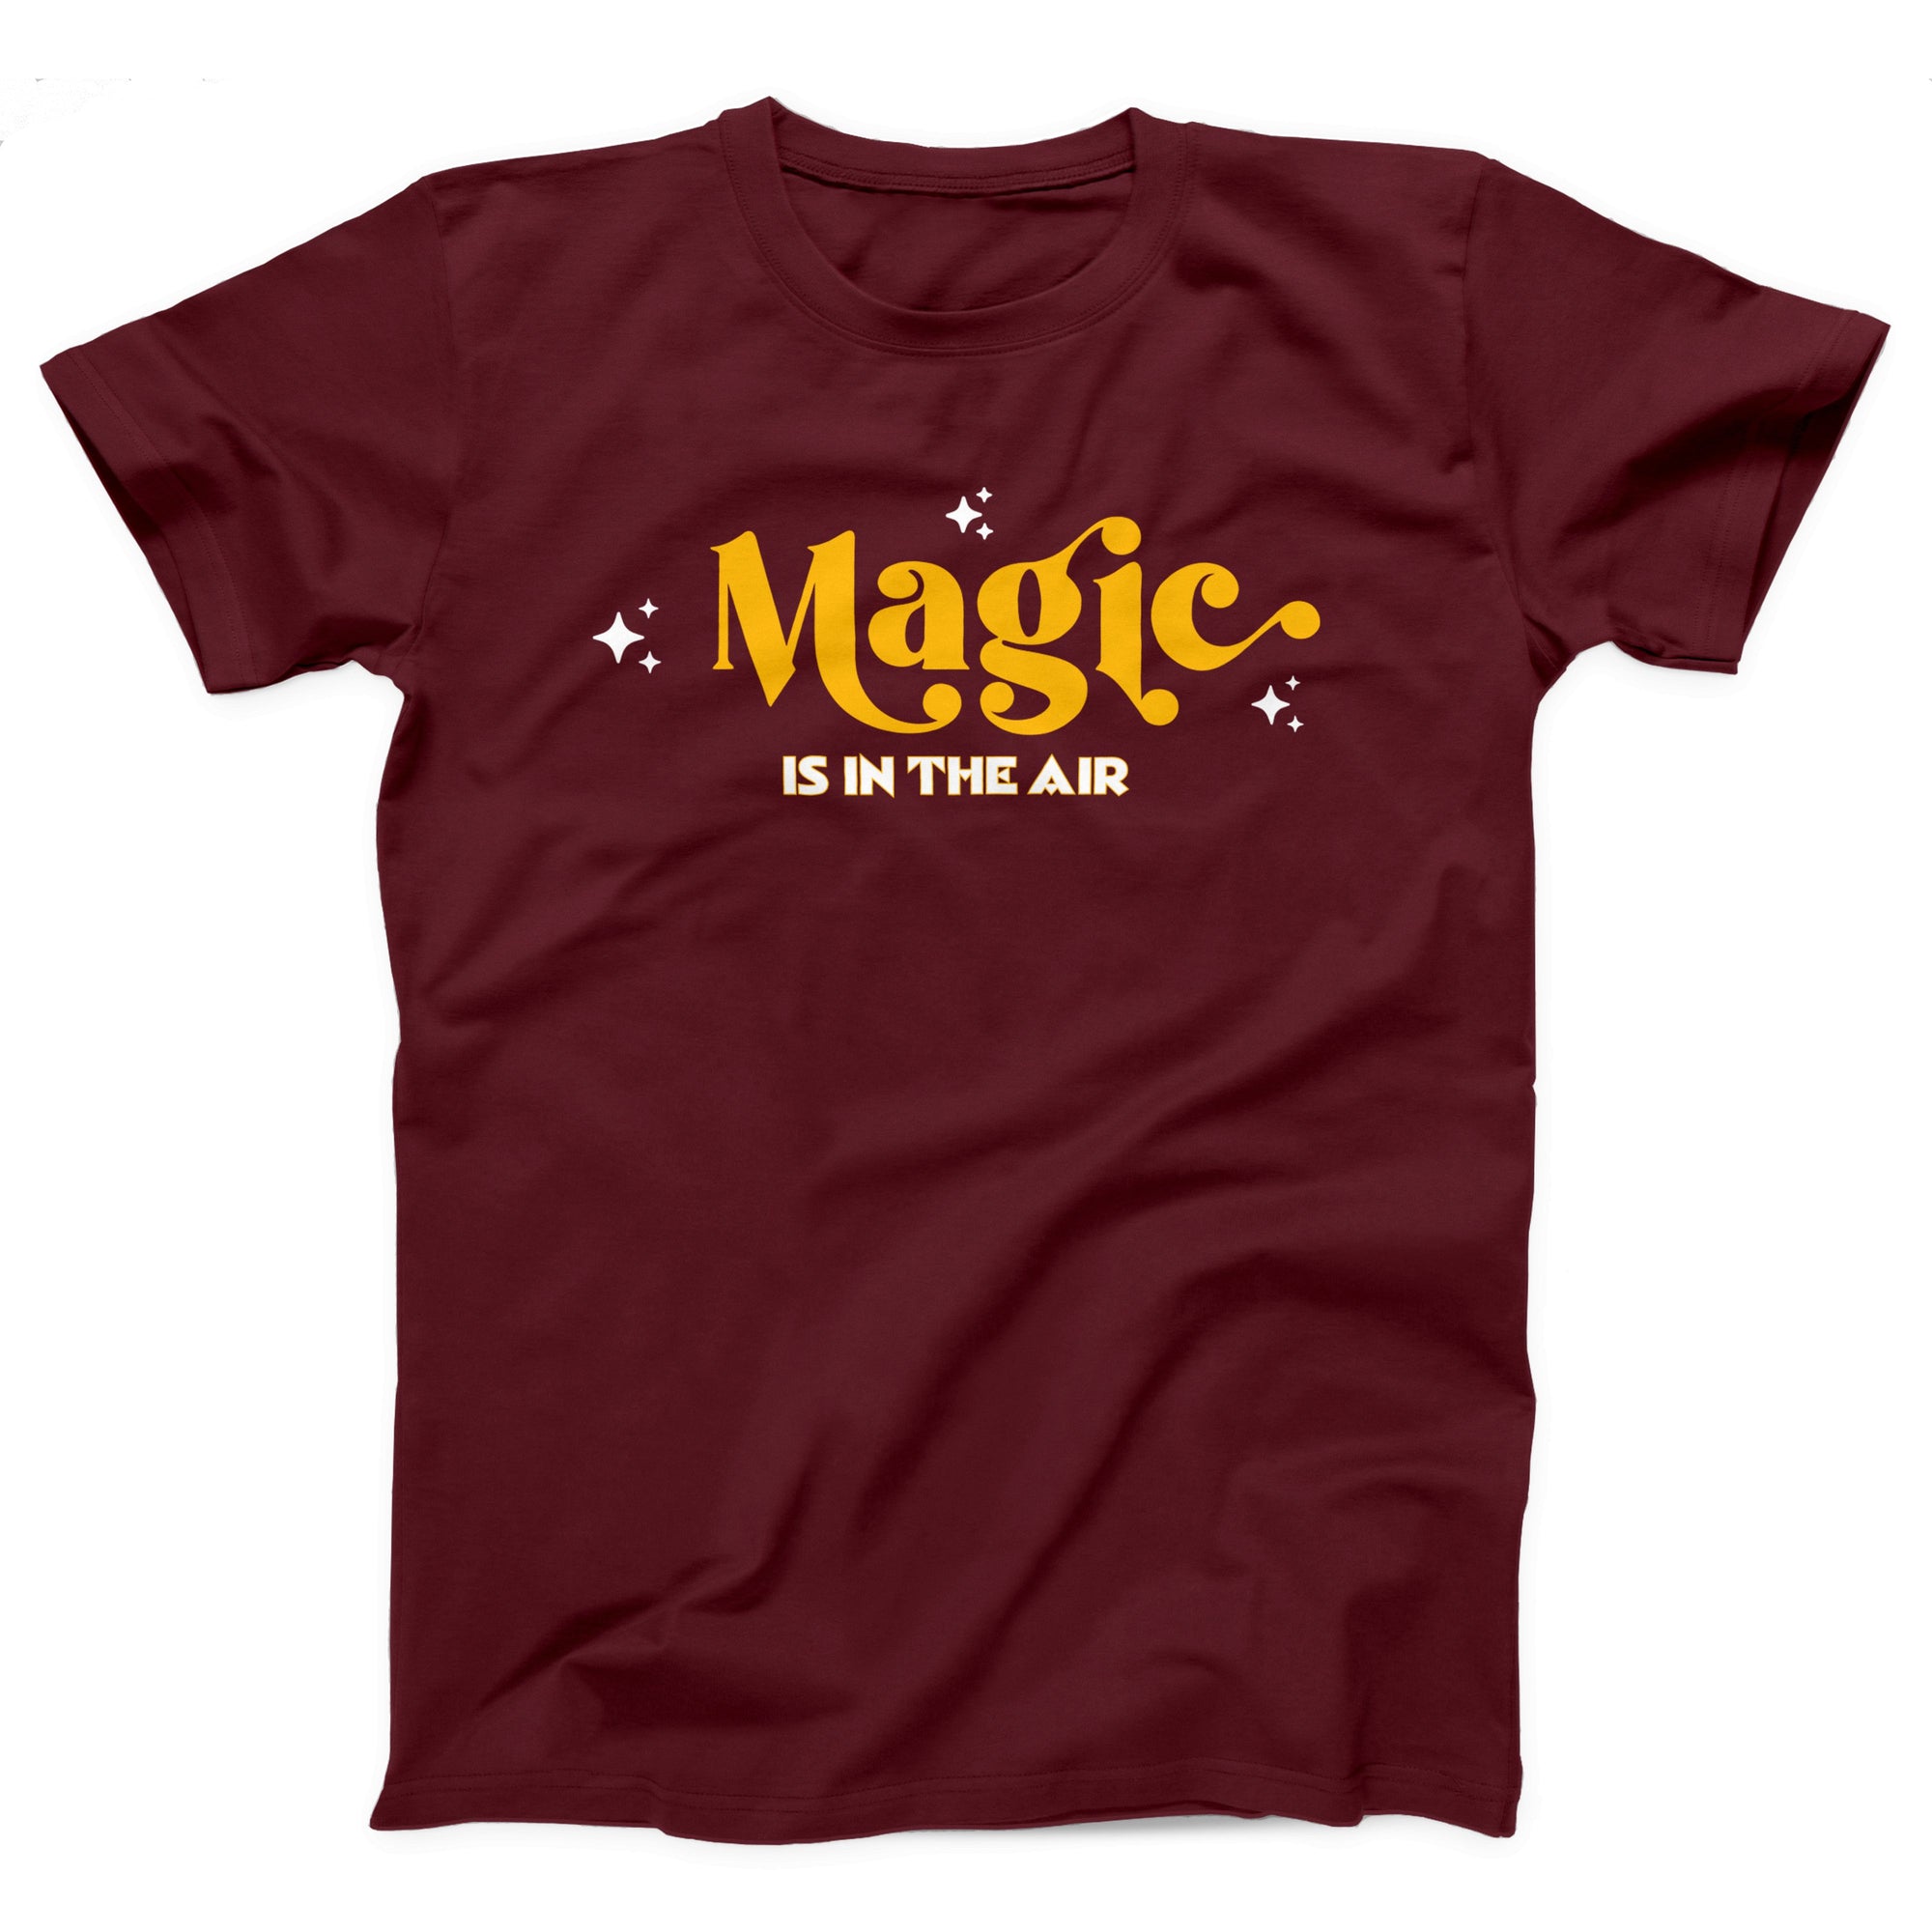 Magic is in the Air Adult Unisex T-Shirt - Twisted Gorilla